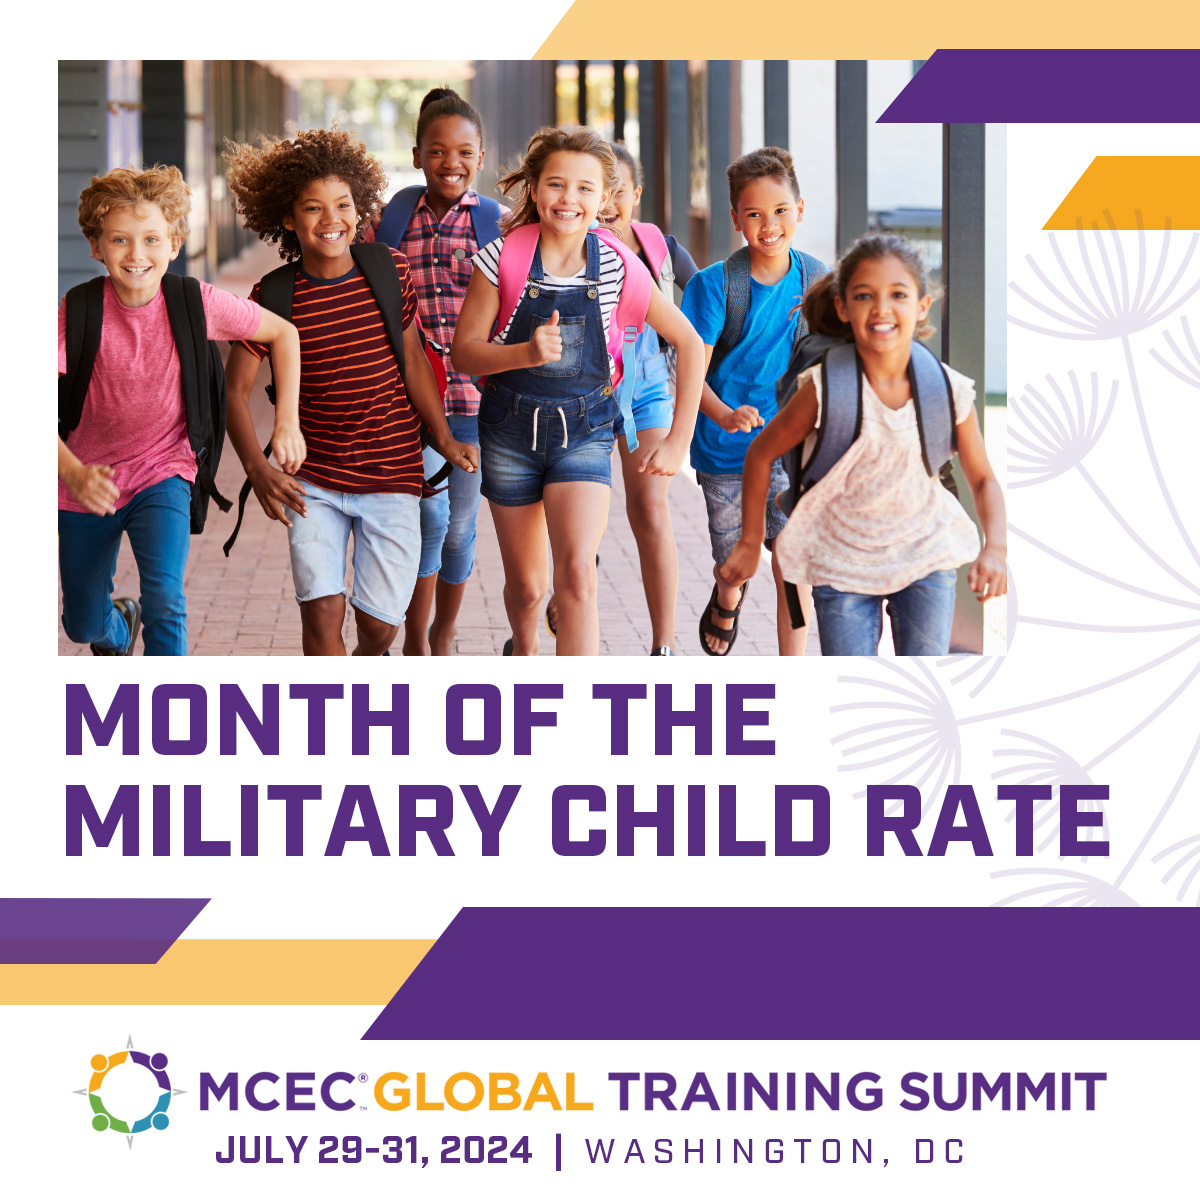 Don't miss out on #MCECGTS24! Register by April 30 for reduced rates on Pre-Summit and the main event. Learn about comprehensive school mental health systems, suicide prevention, and promoting mental health for military-connected youth. Register here: bit.ly/4aqS96P